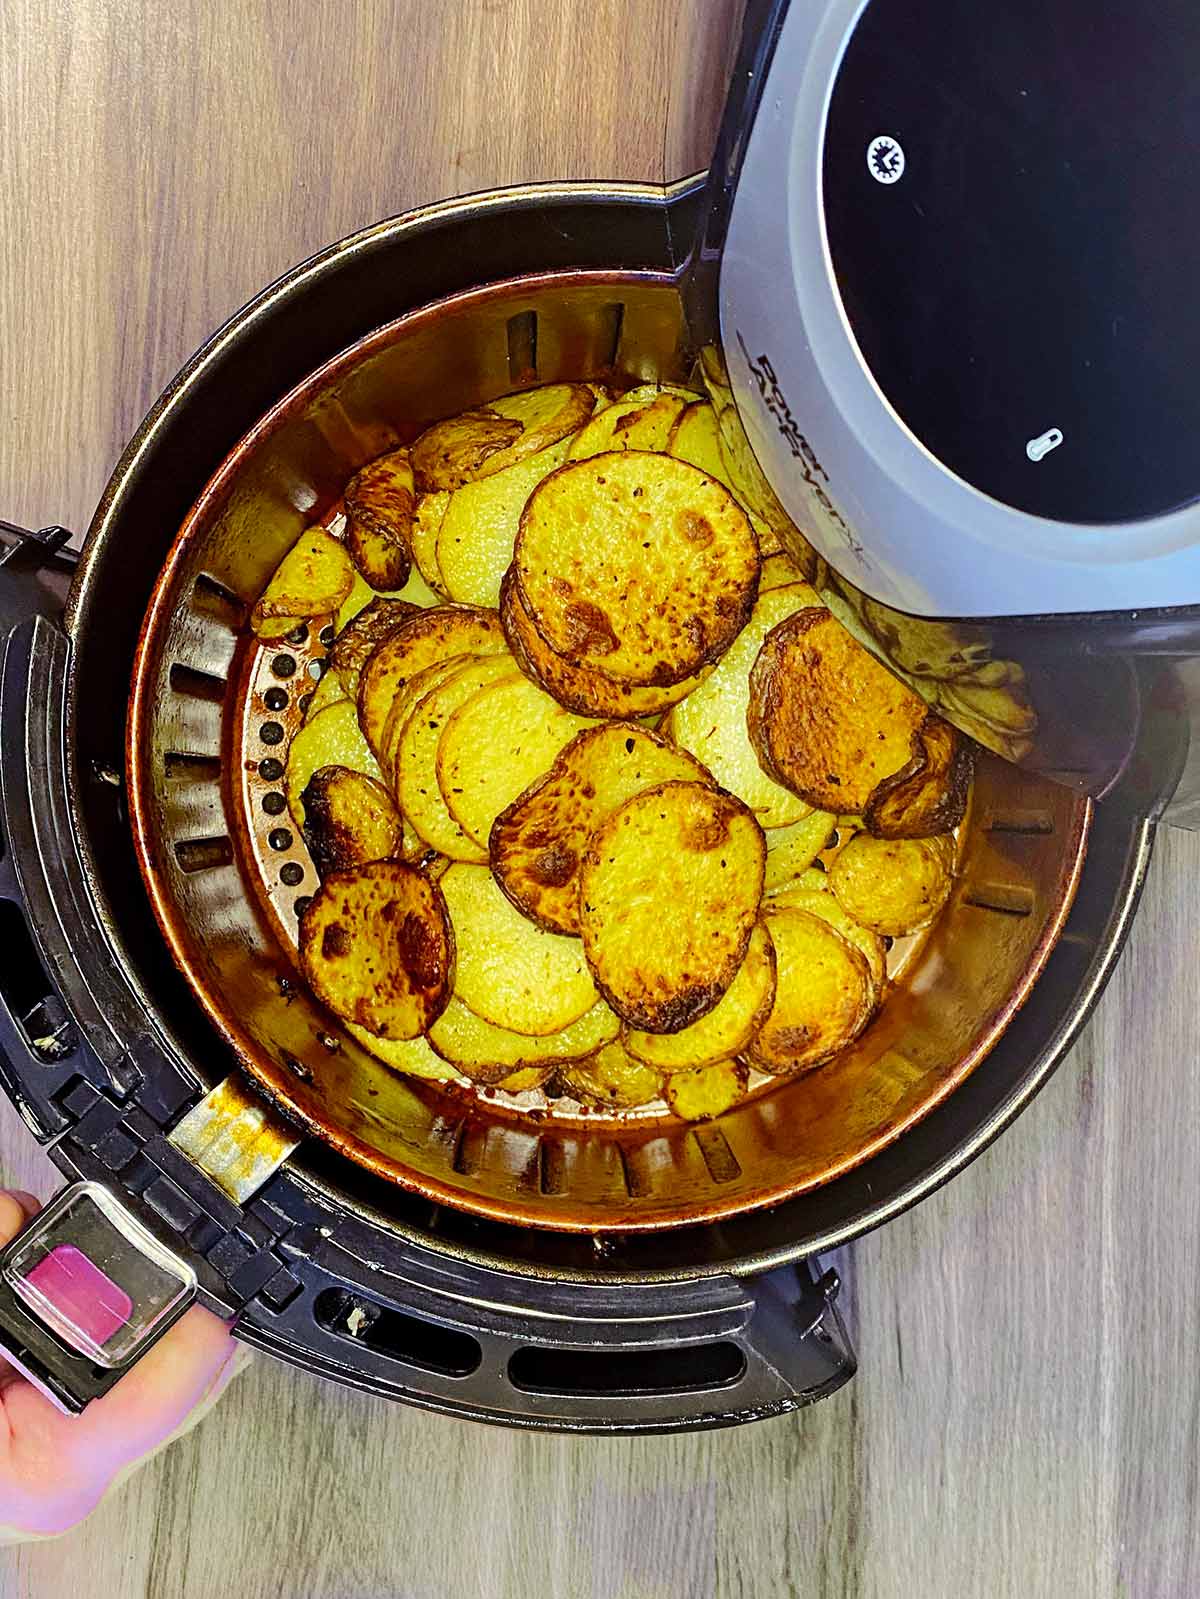 Cooked potato slices being removed from an air fryer.